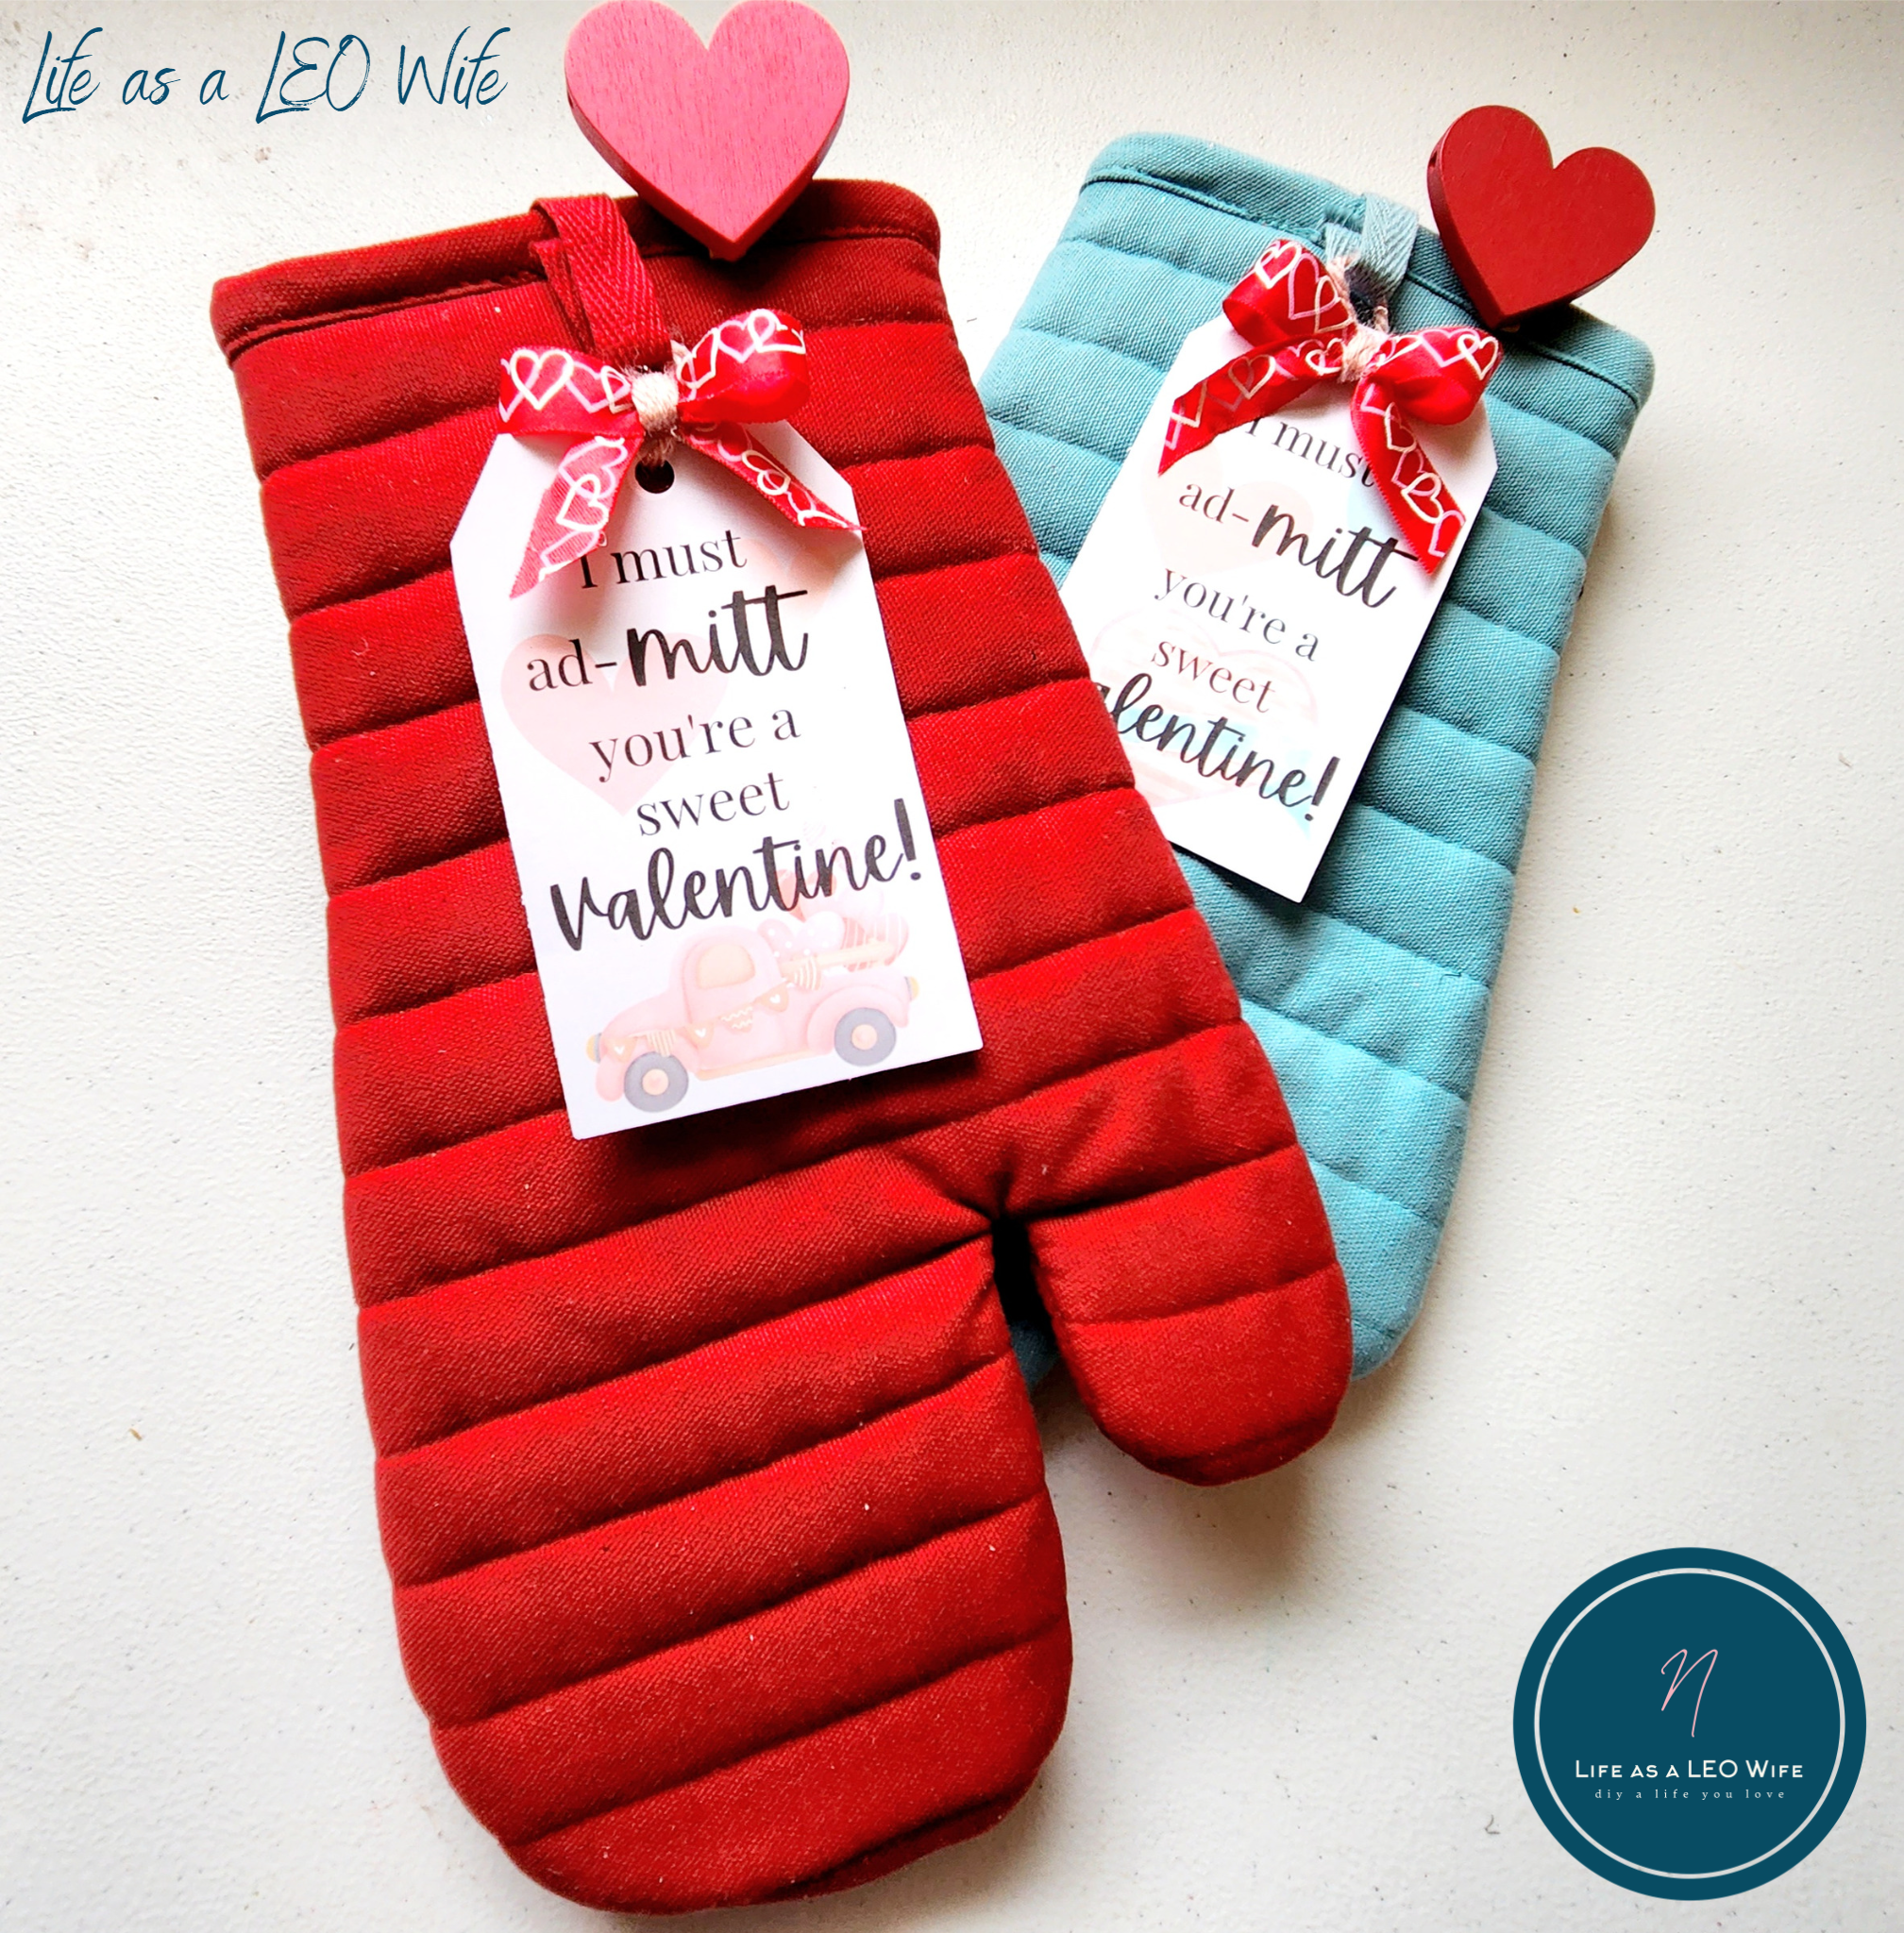 Last minute Valentine's gift for my son's teachers; a blue oven mitt and a red oven mitt with gift tags that say, "I must ad-mitt you're a sweet Valentine!"